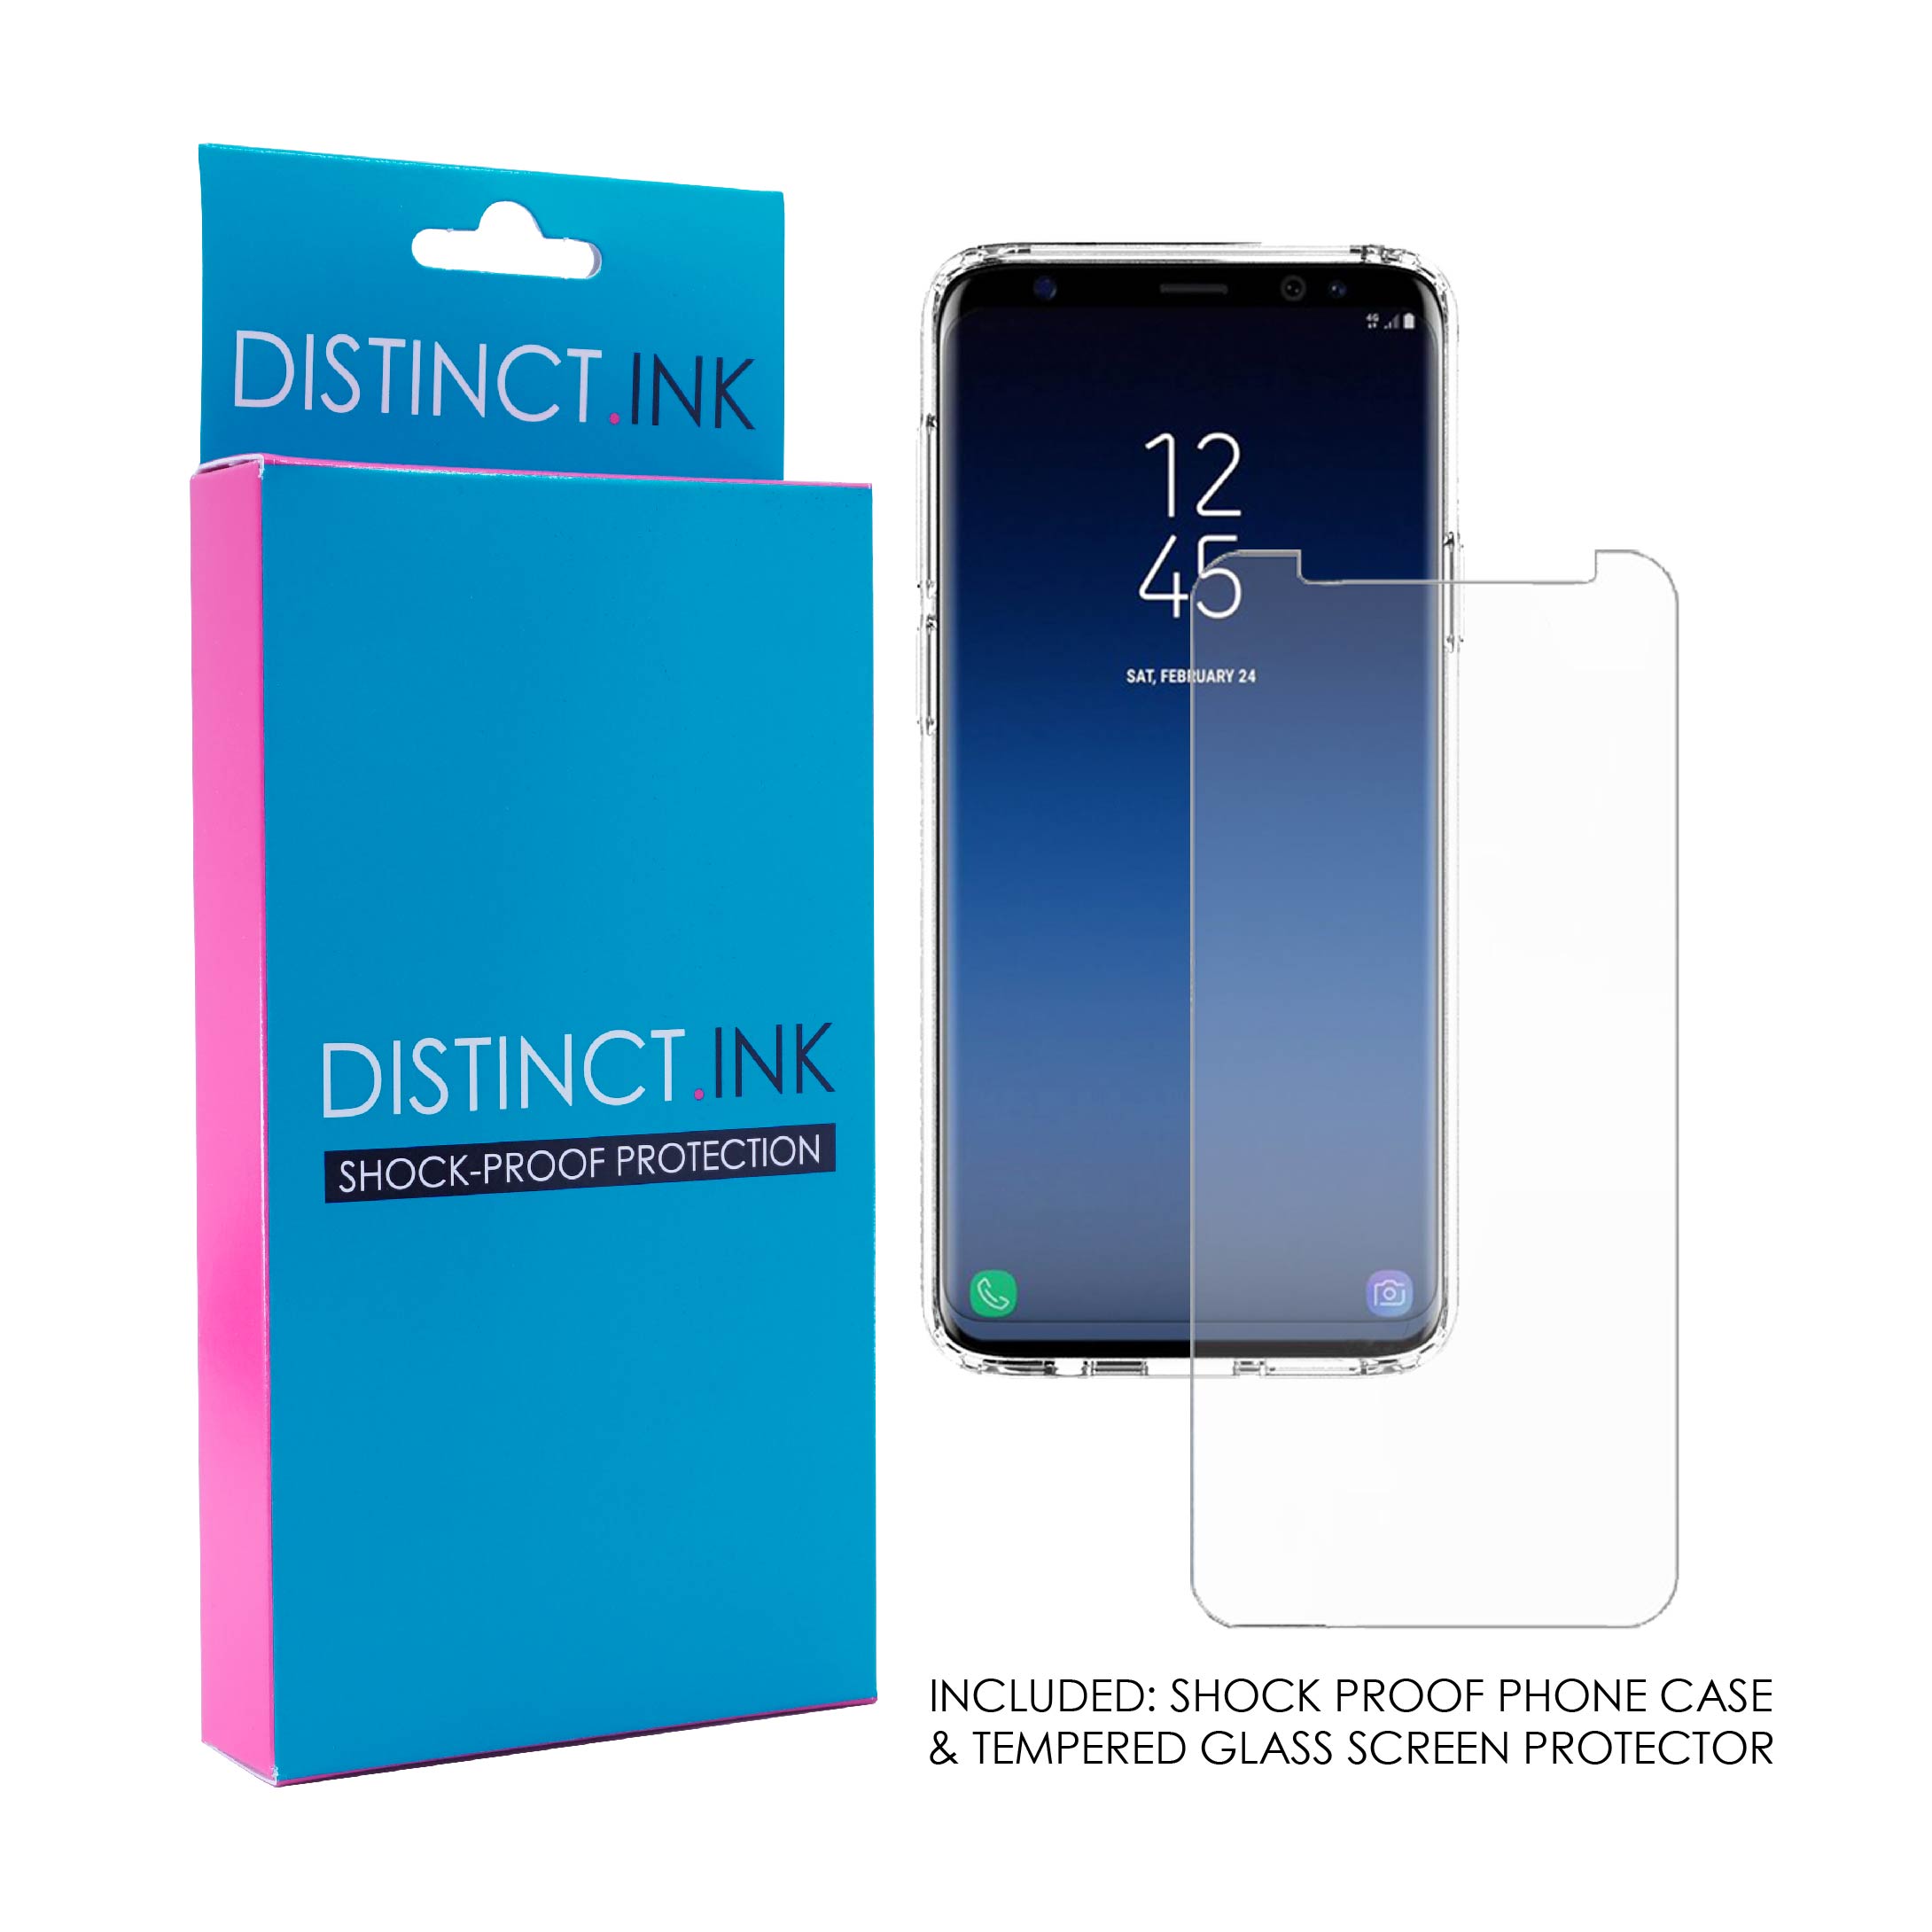 DistinctInk Clear Shockproof Hybrid Case for Samsung Galaxy S9+ PLUS (6.2" Screen) - TPU Bumper Acrylic Back Tempered Glass Screen Protector - Darling Don't Forget to Fall In Love with Yourself - image 4 of 5